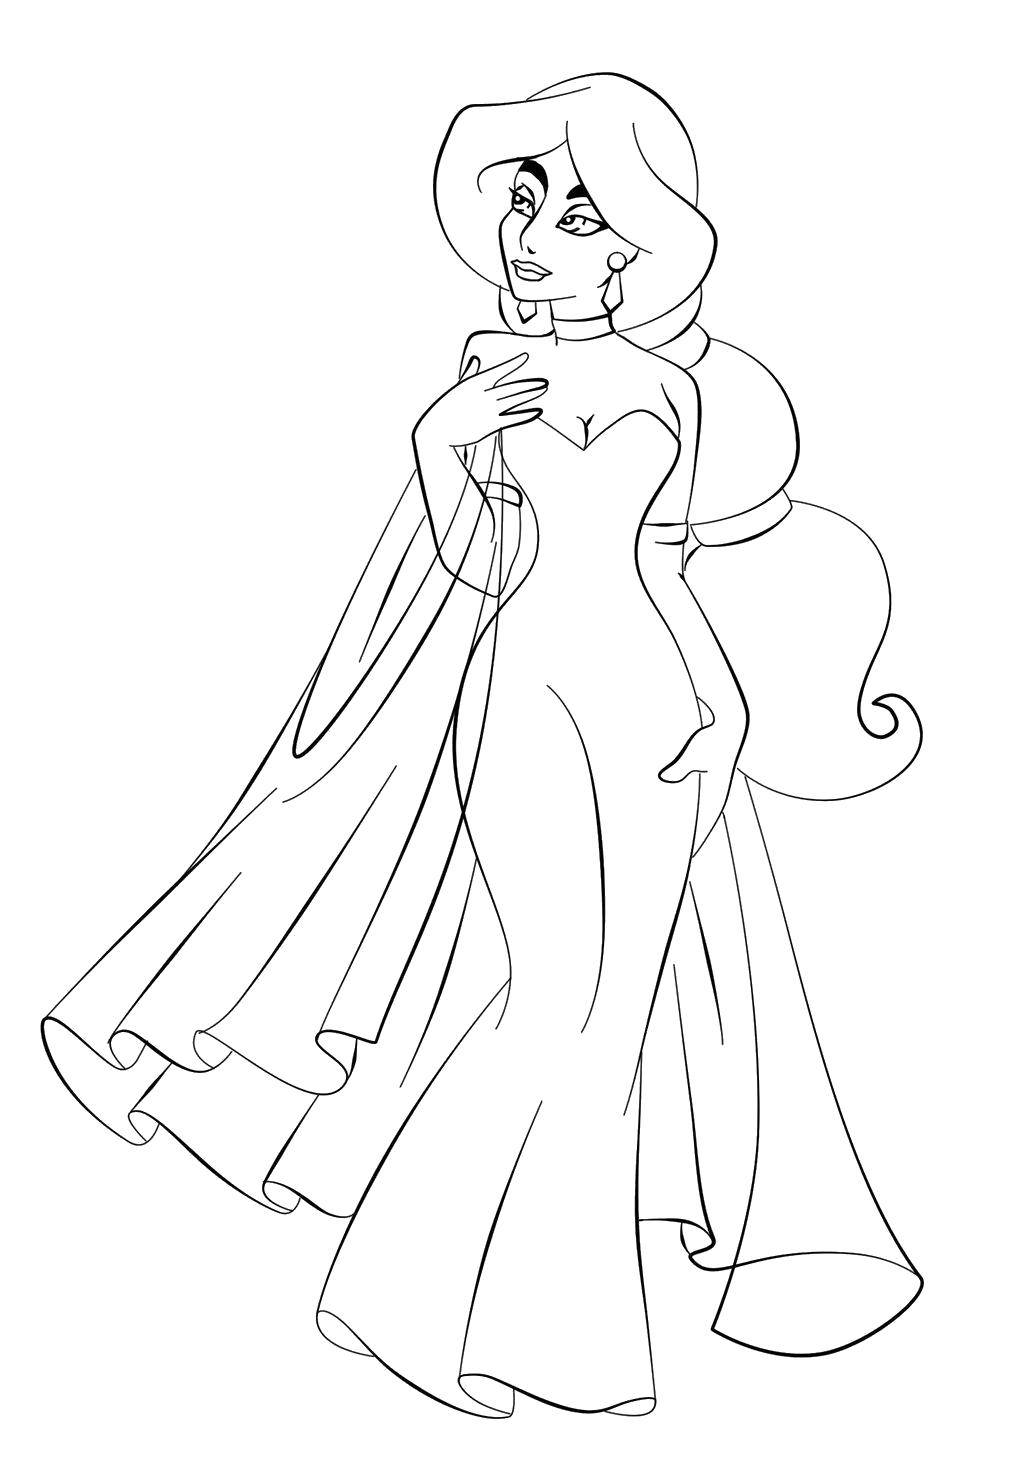 Coloring Jasimn in a gorgeous dress. Category Dress. Tags:  Clothing, dress.